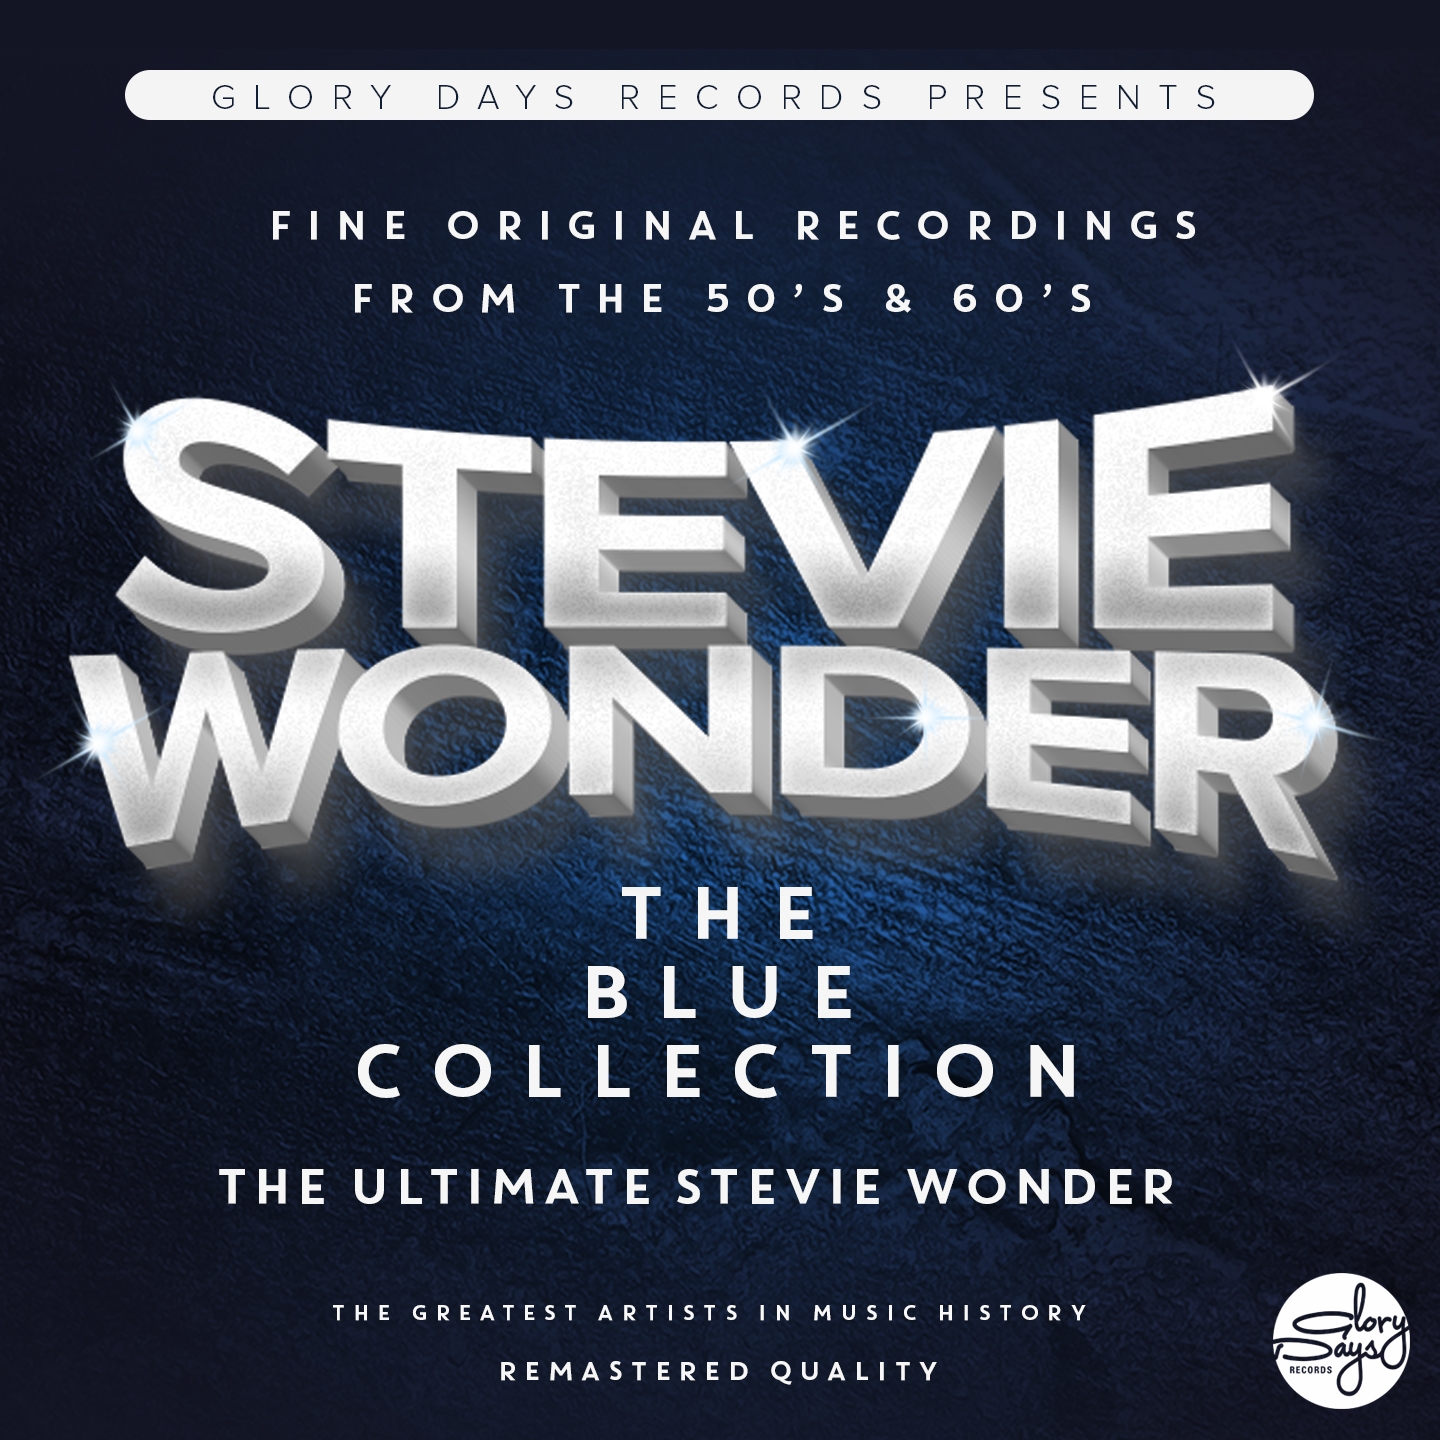 The Blue Collection (The Ultimate Stevie Wonder)